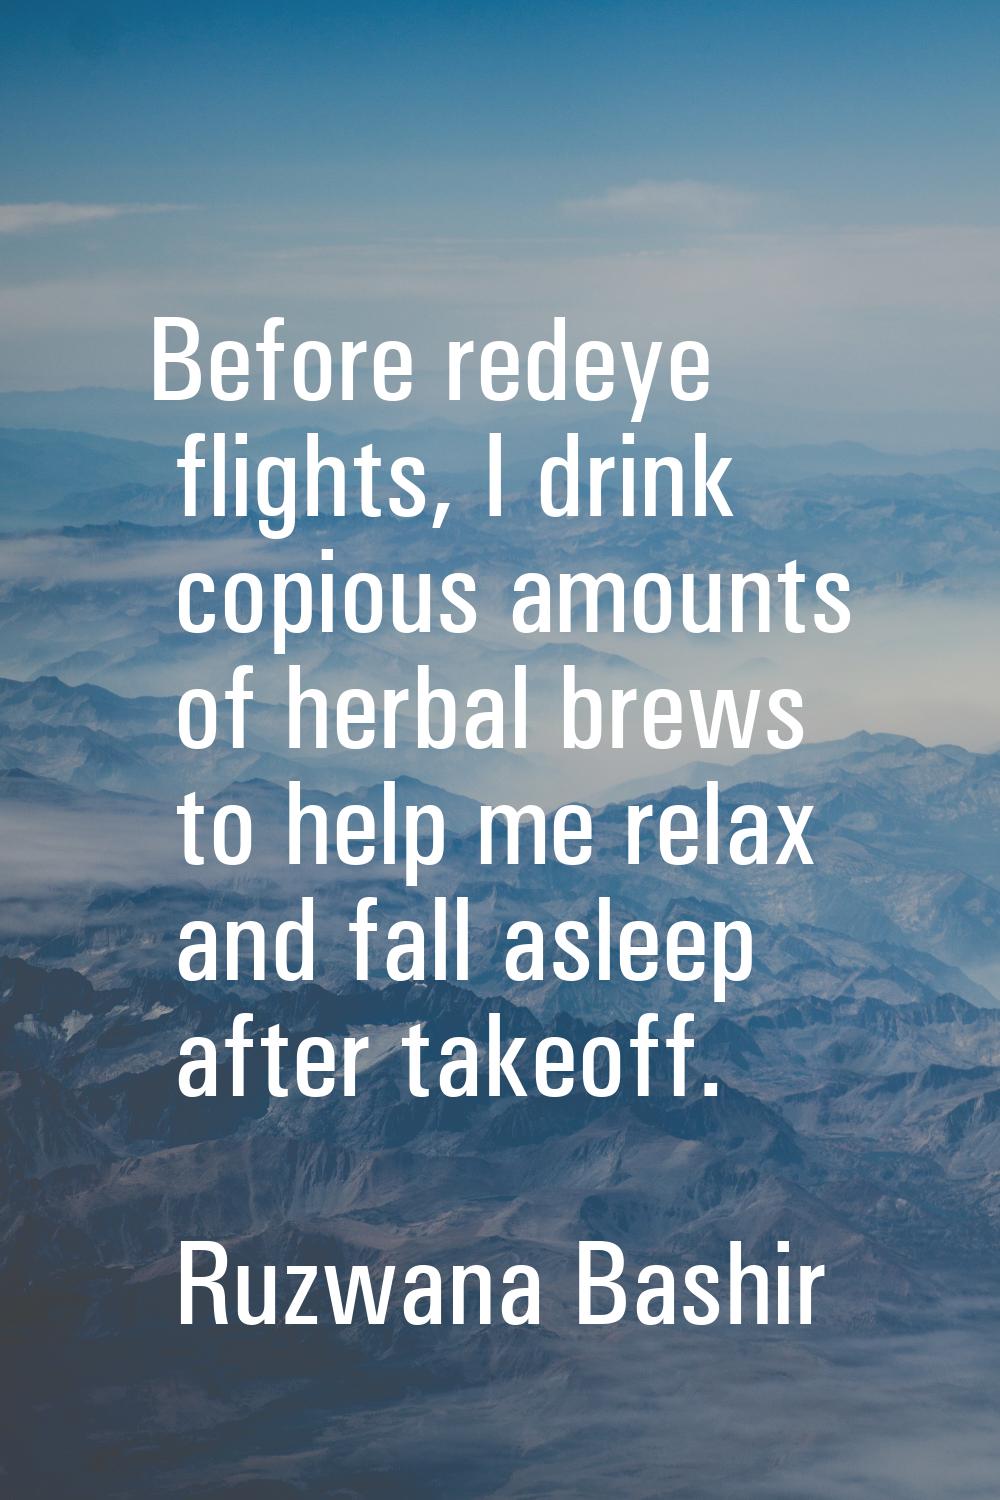 Before redeye flights, I drink copious amounts of herbal brews to help me relax and fall asleep aft